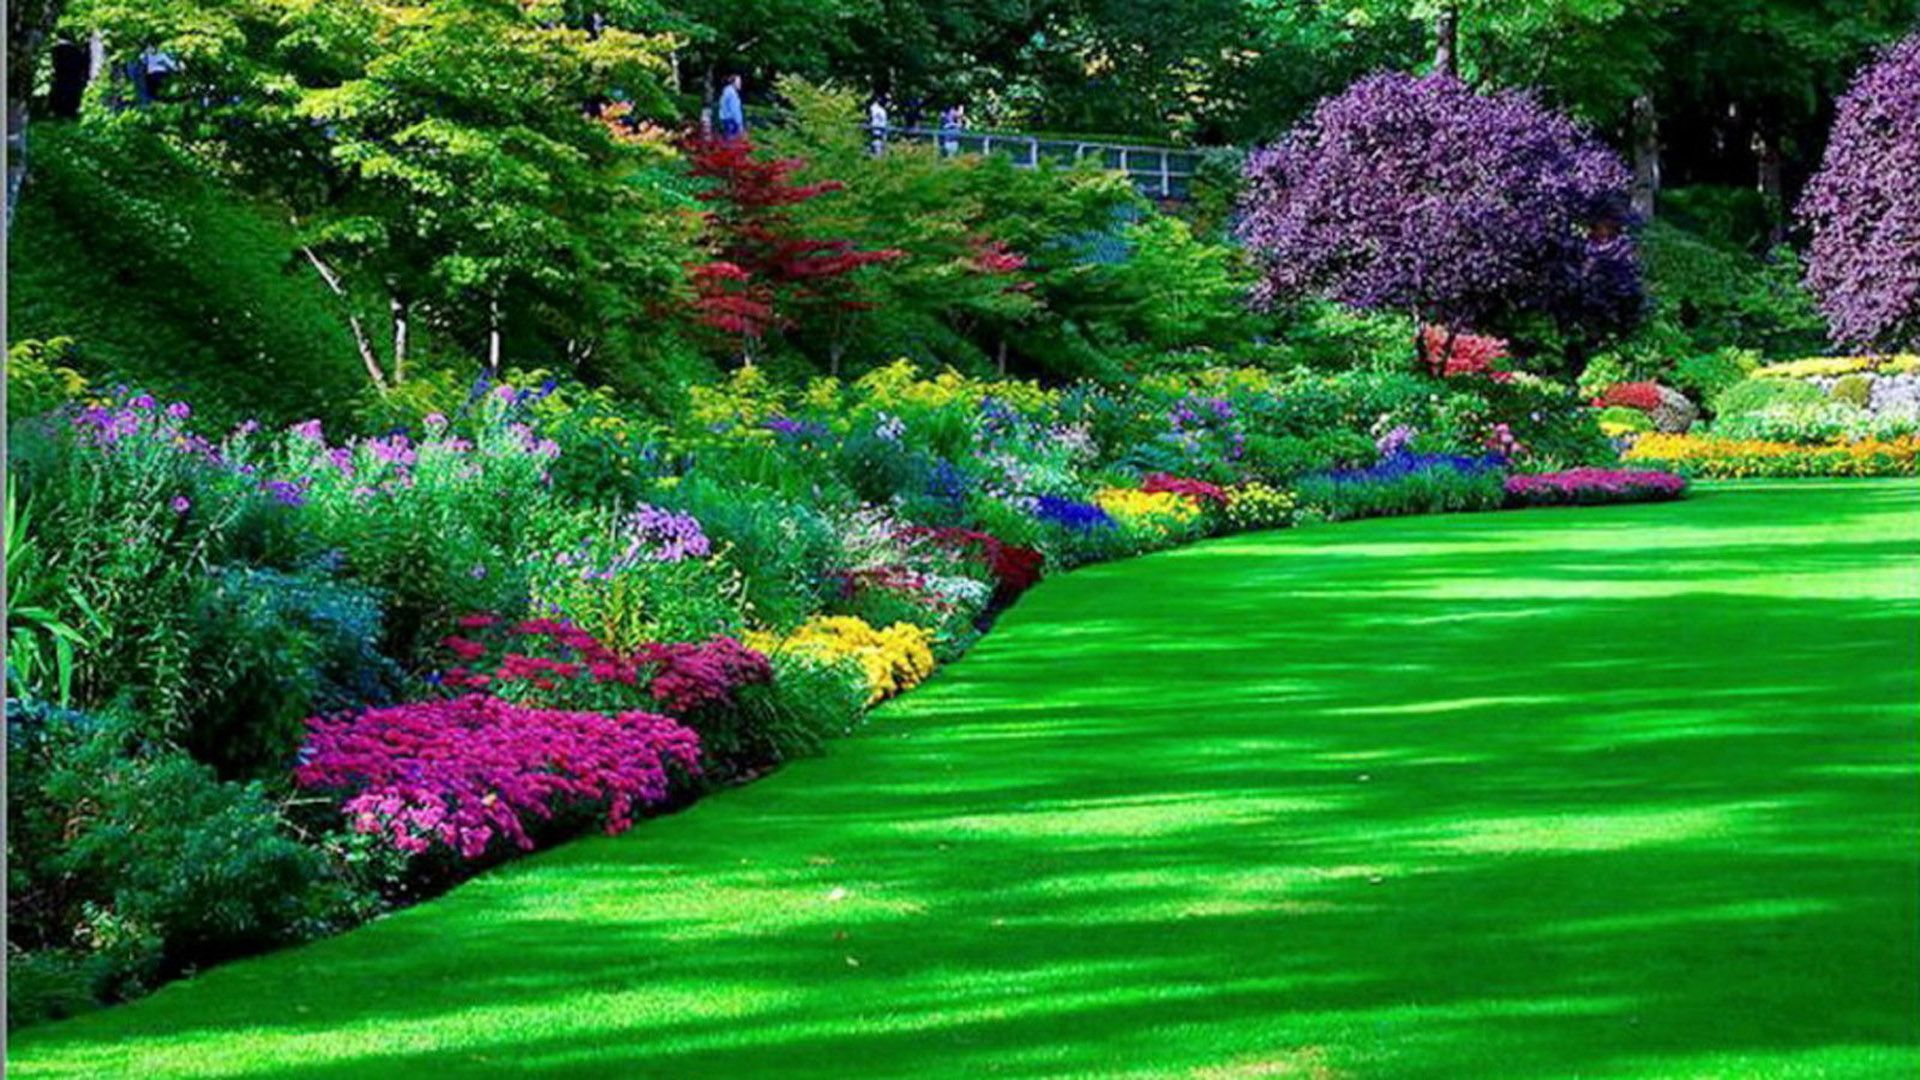 Colorful Flowers Green Grass Plants Trees Bushes Garden HD Green Aesthetic Wallpaper